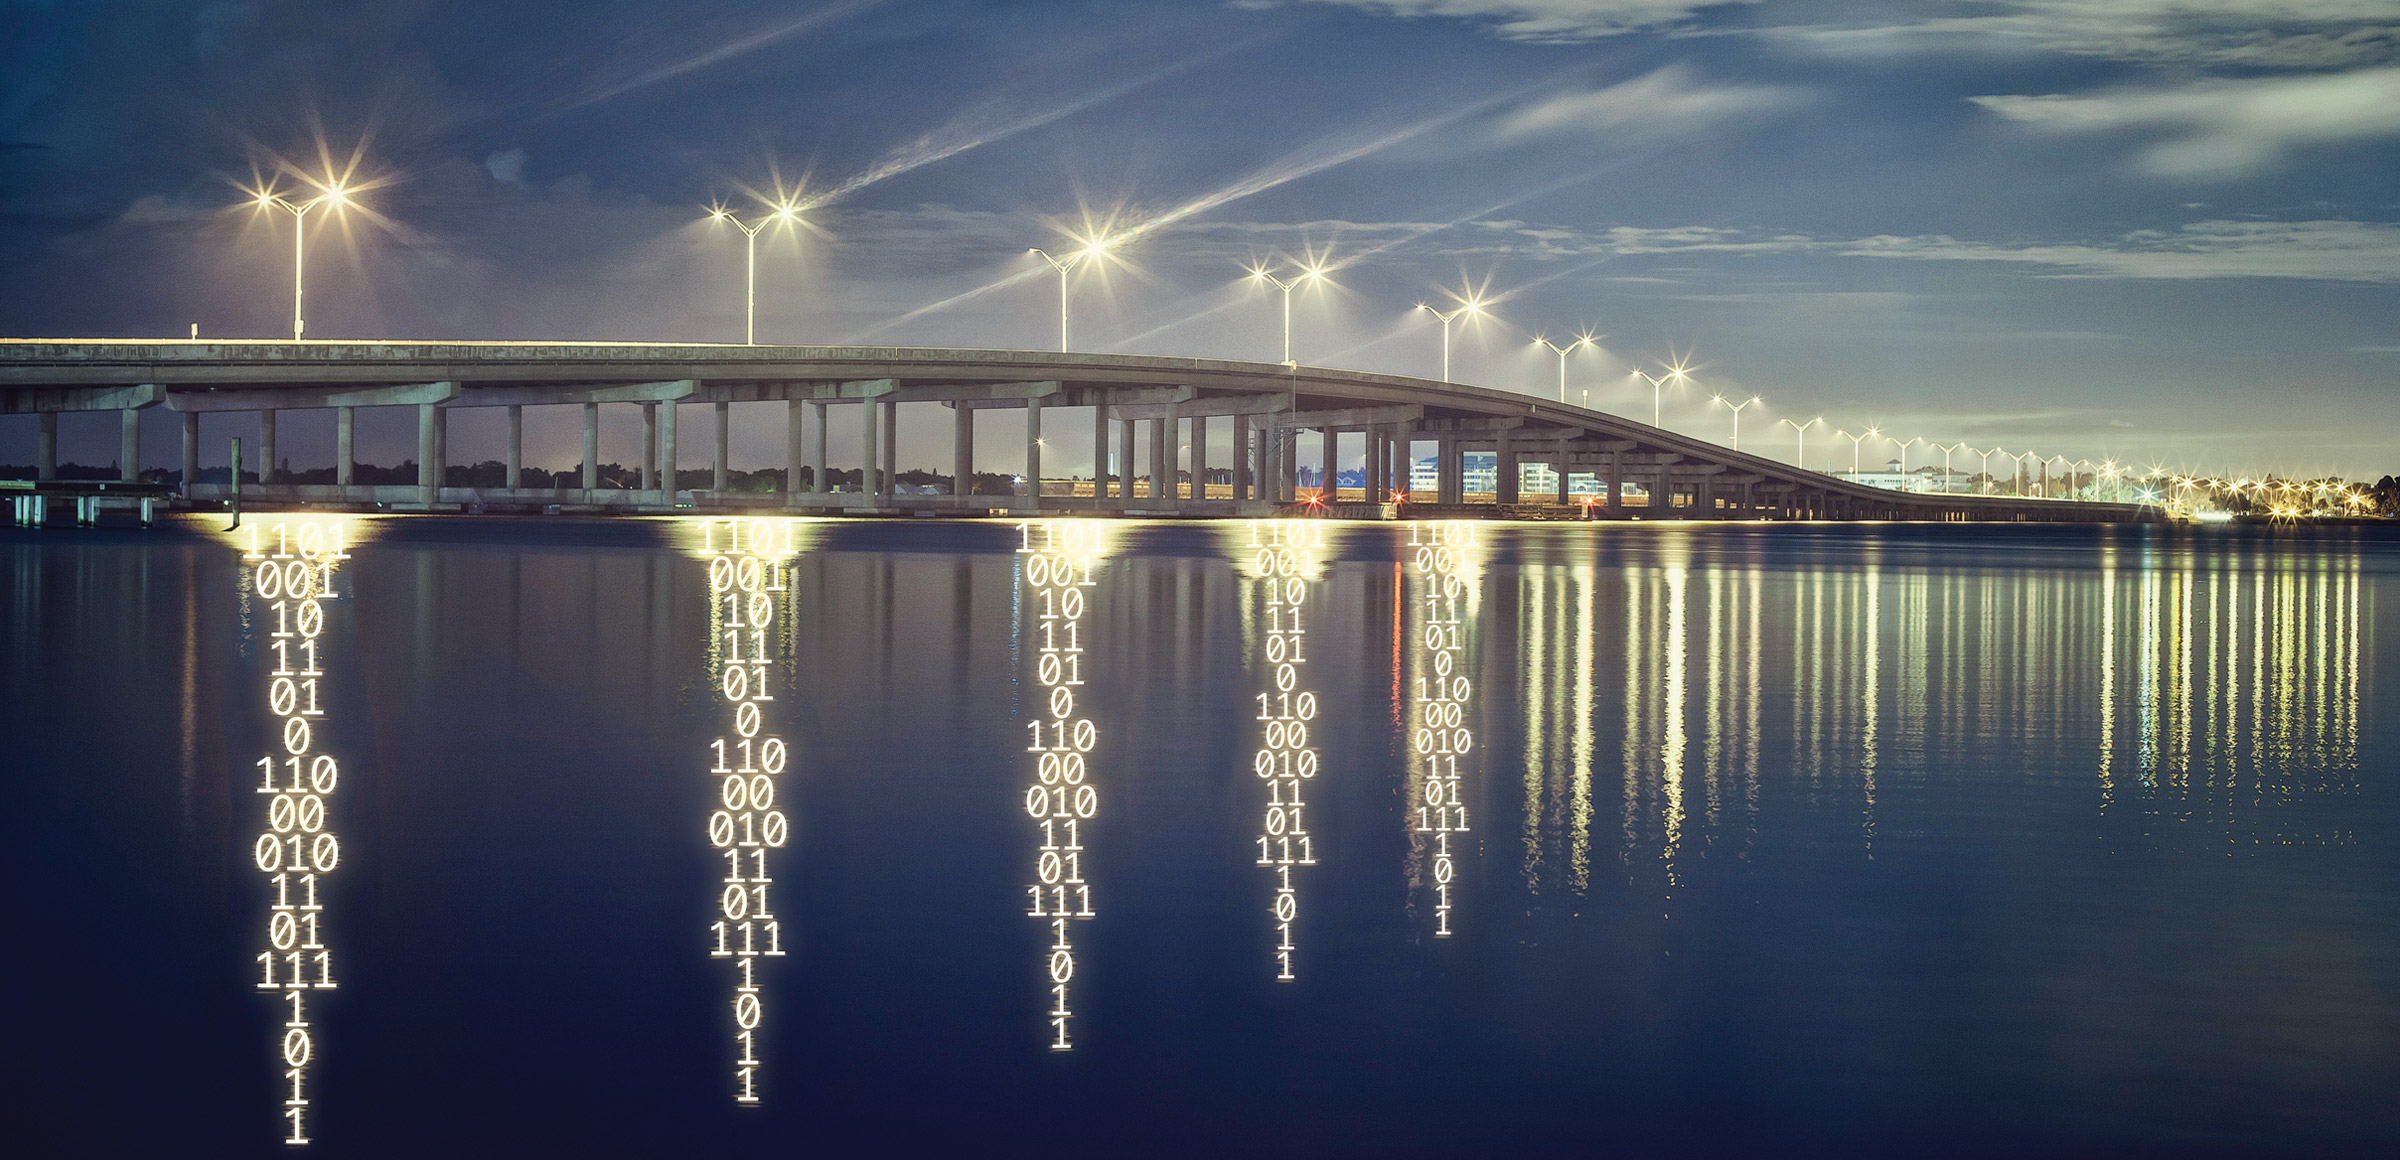 With its smart lighting Enel is improving efficiency in cities and